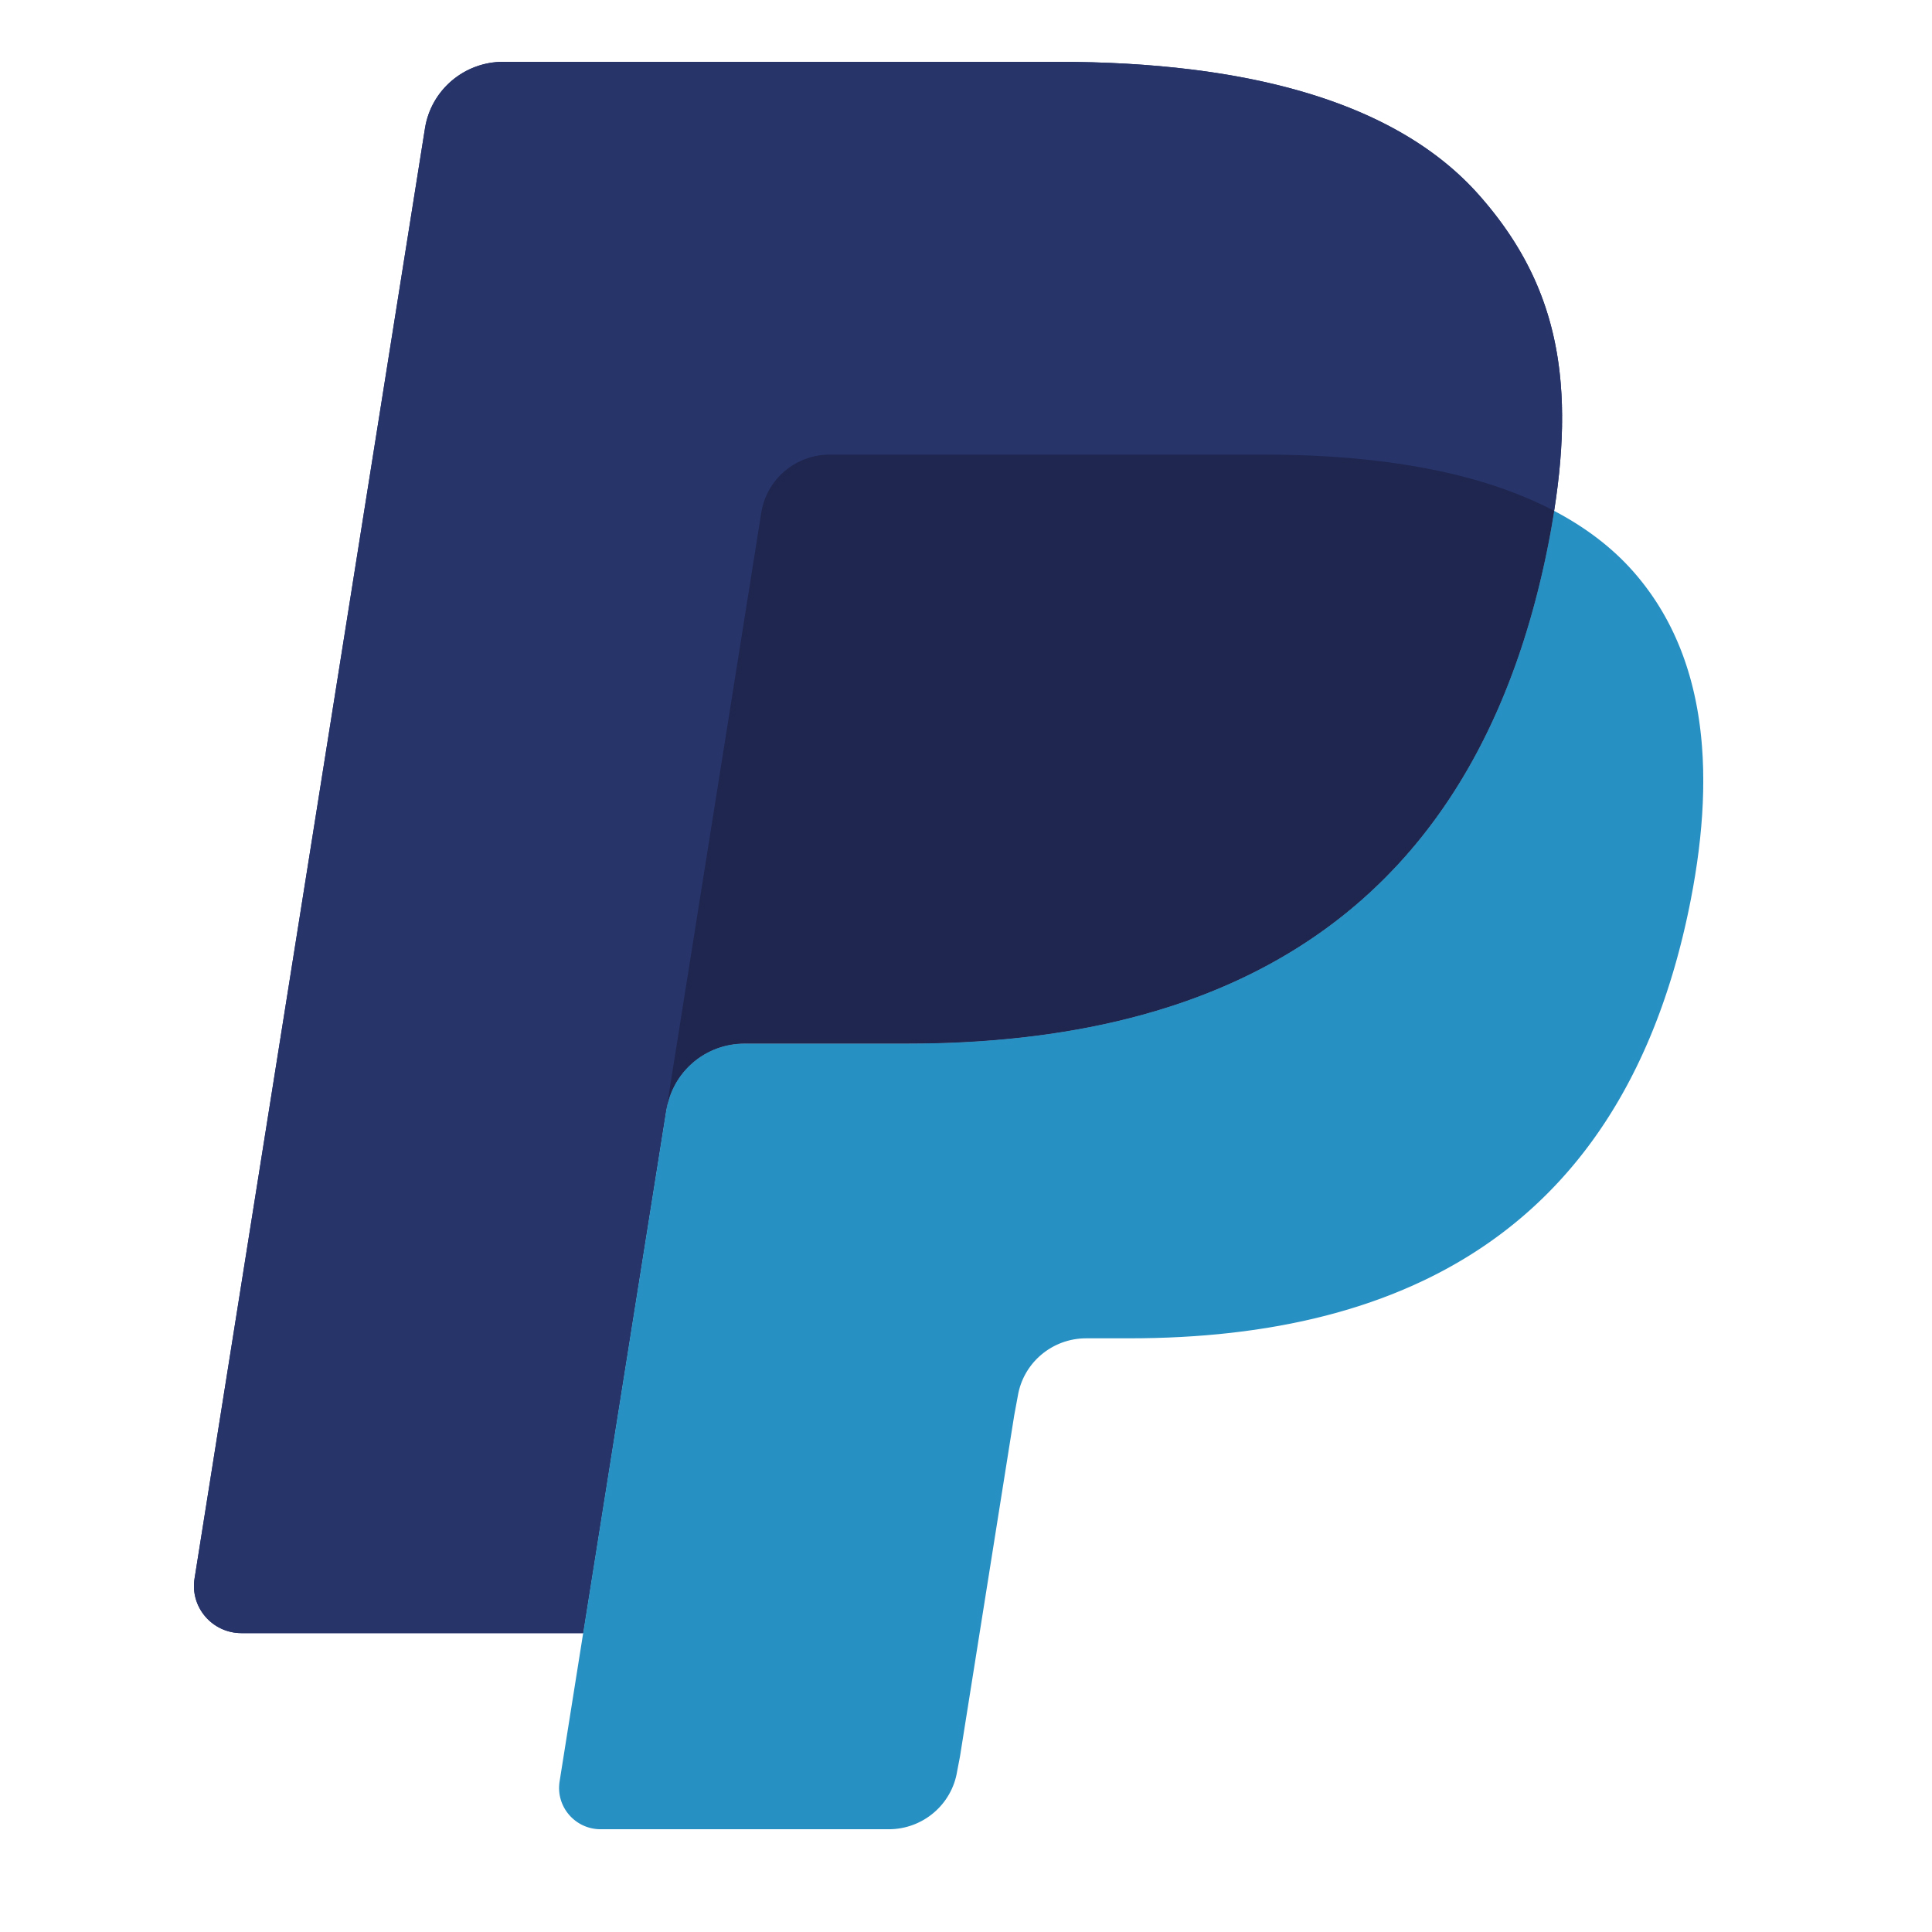 Paypal Logo, Paypal Symbol, Meaning, History and Evolution
